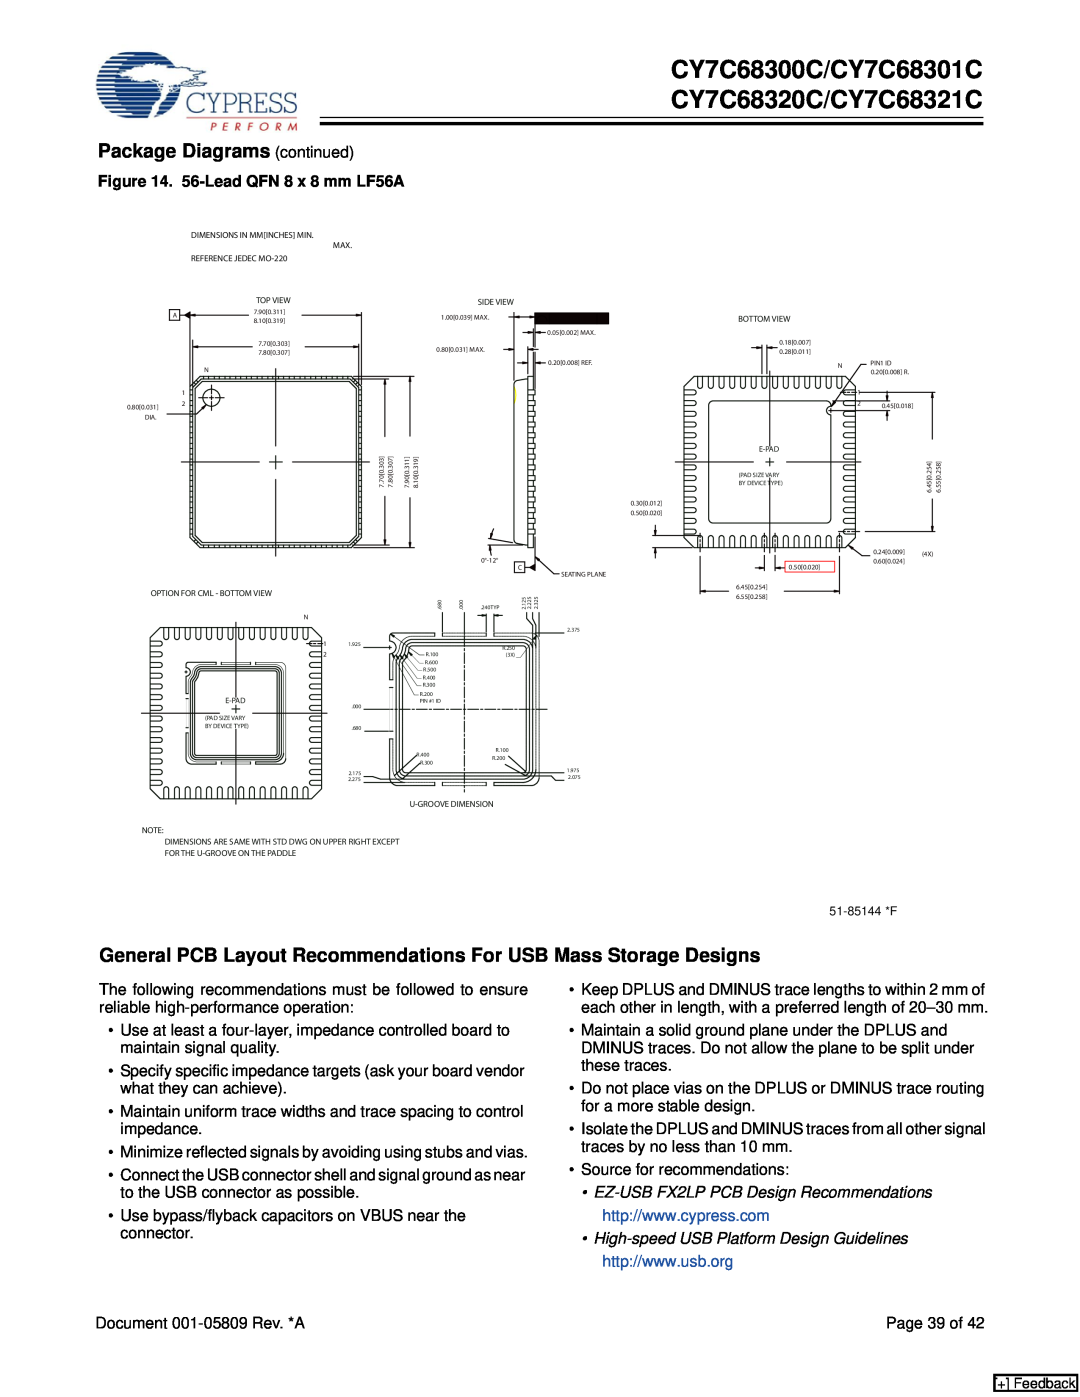 Cypress CY7C68300C General PCB Layout Recommendations For USB Mass Storage Designs, Package Diagrams continued, Page 39 of 